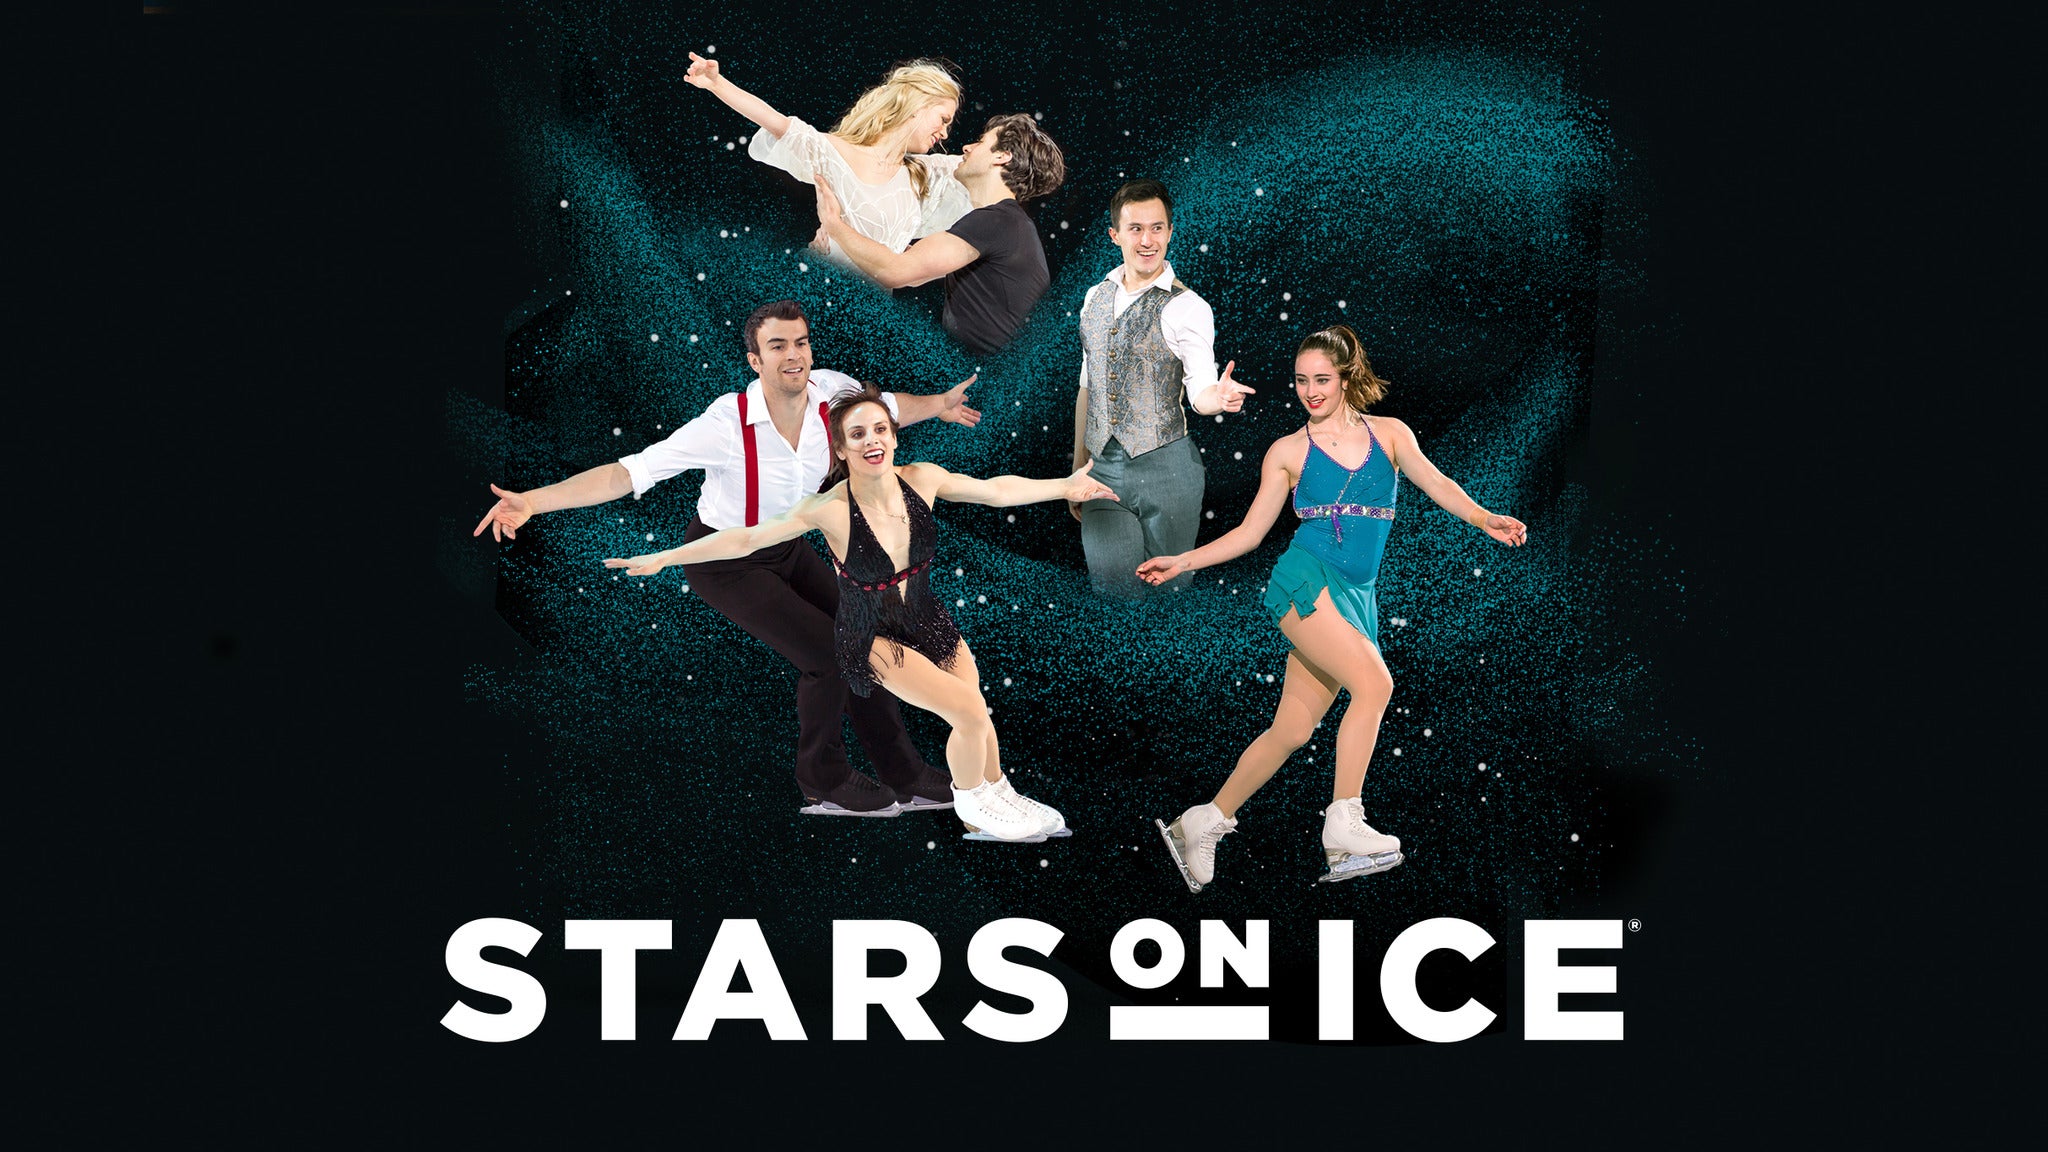 Stars on Ice - Canada in Kanata promo photo for Group Discounts presale offer code